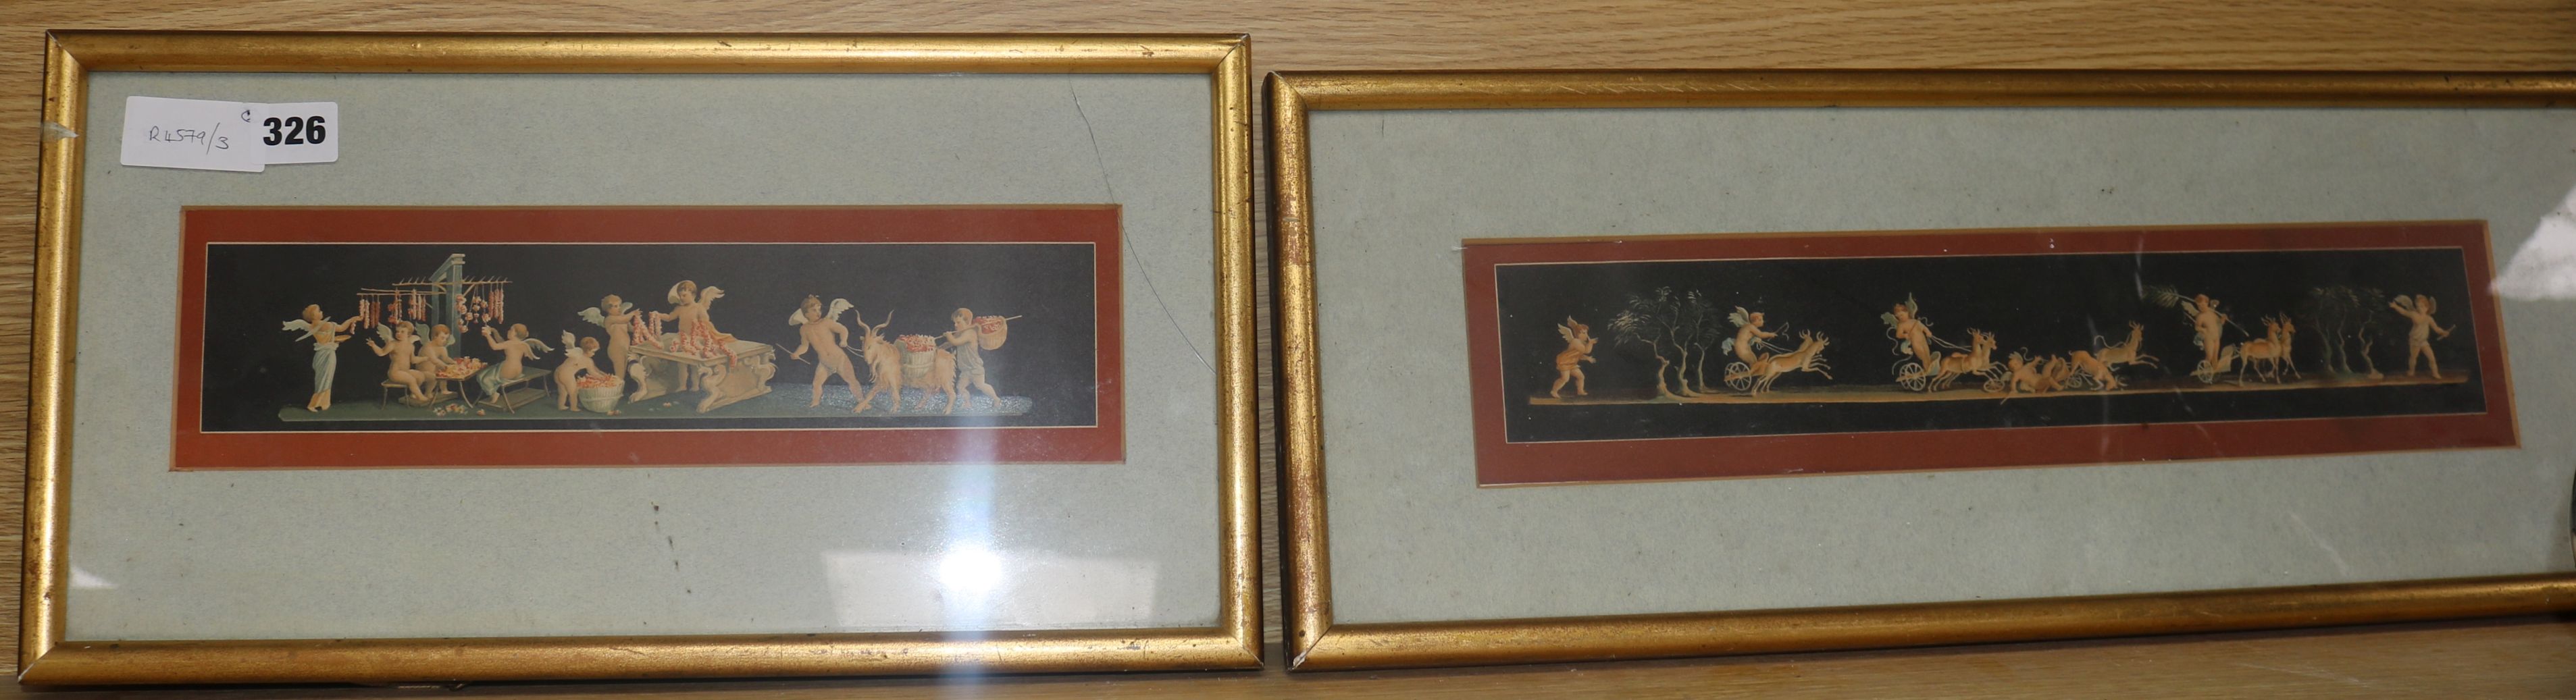 A pair of prints of amorini3.5 x 13in.